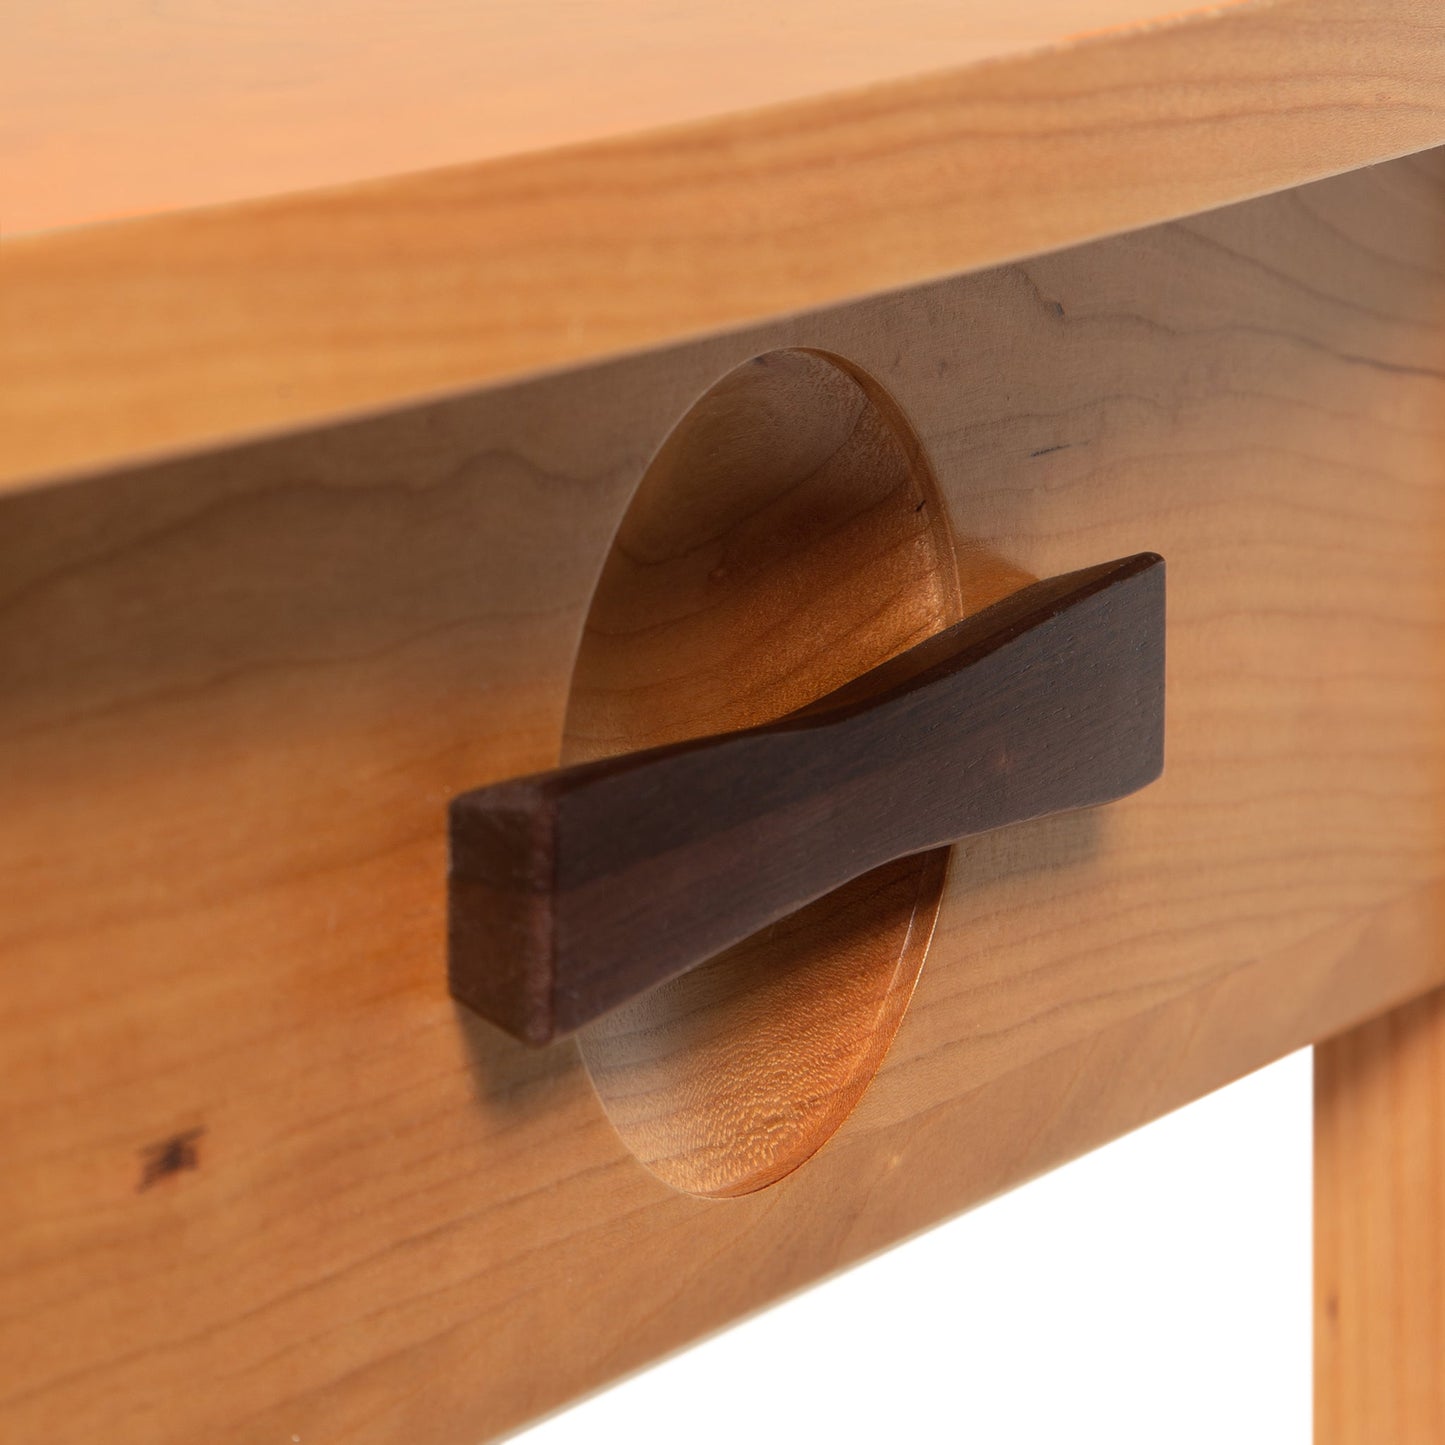 A close up of a wooden drawer with a knob.